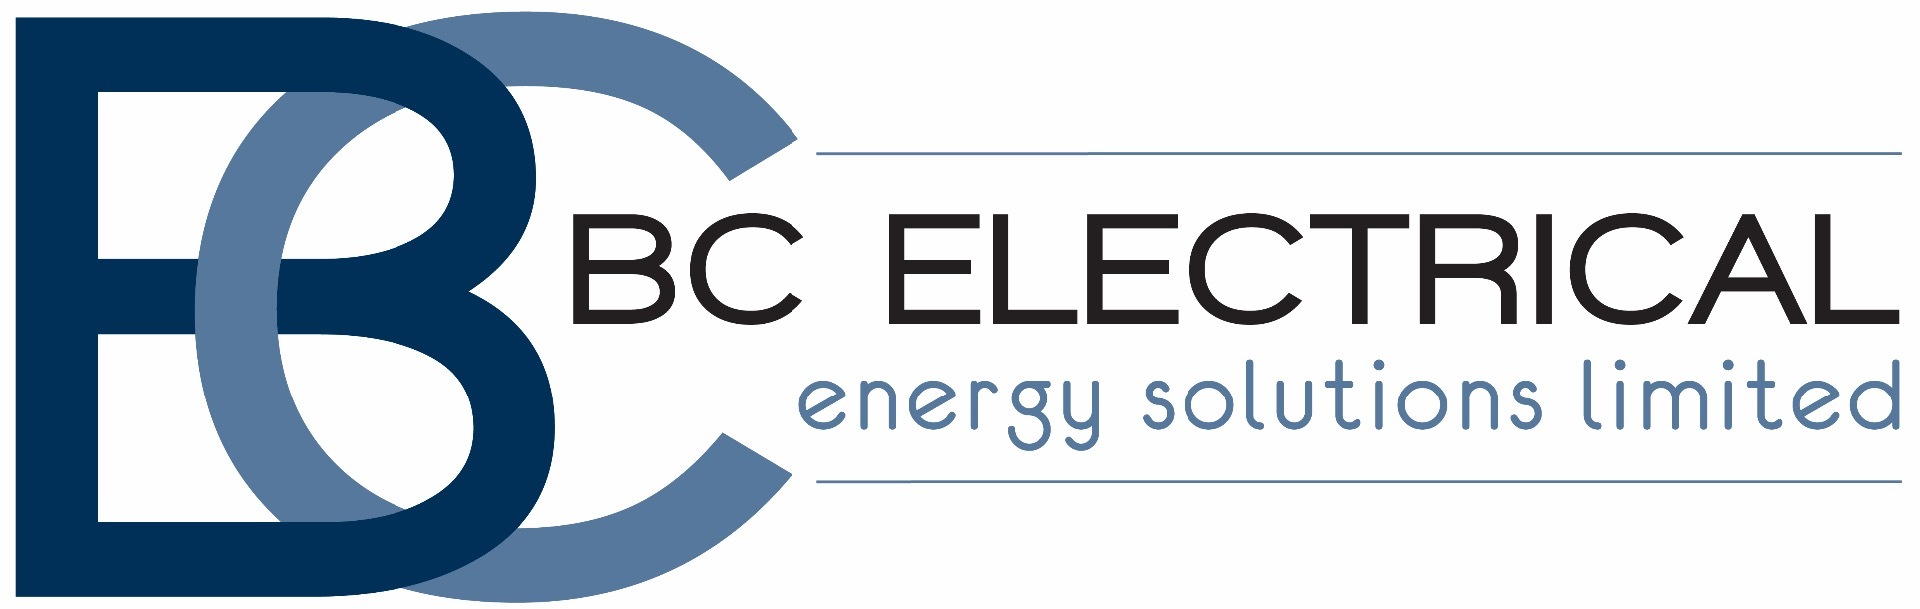 B C Electrical Services in Corby - industrial and commercial electrical contractors